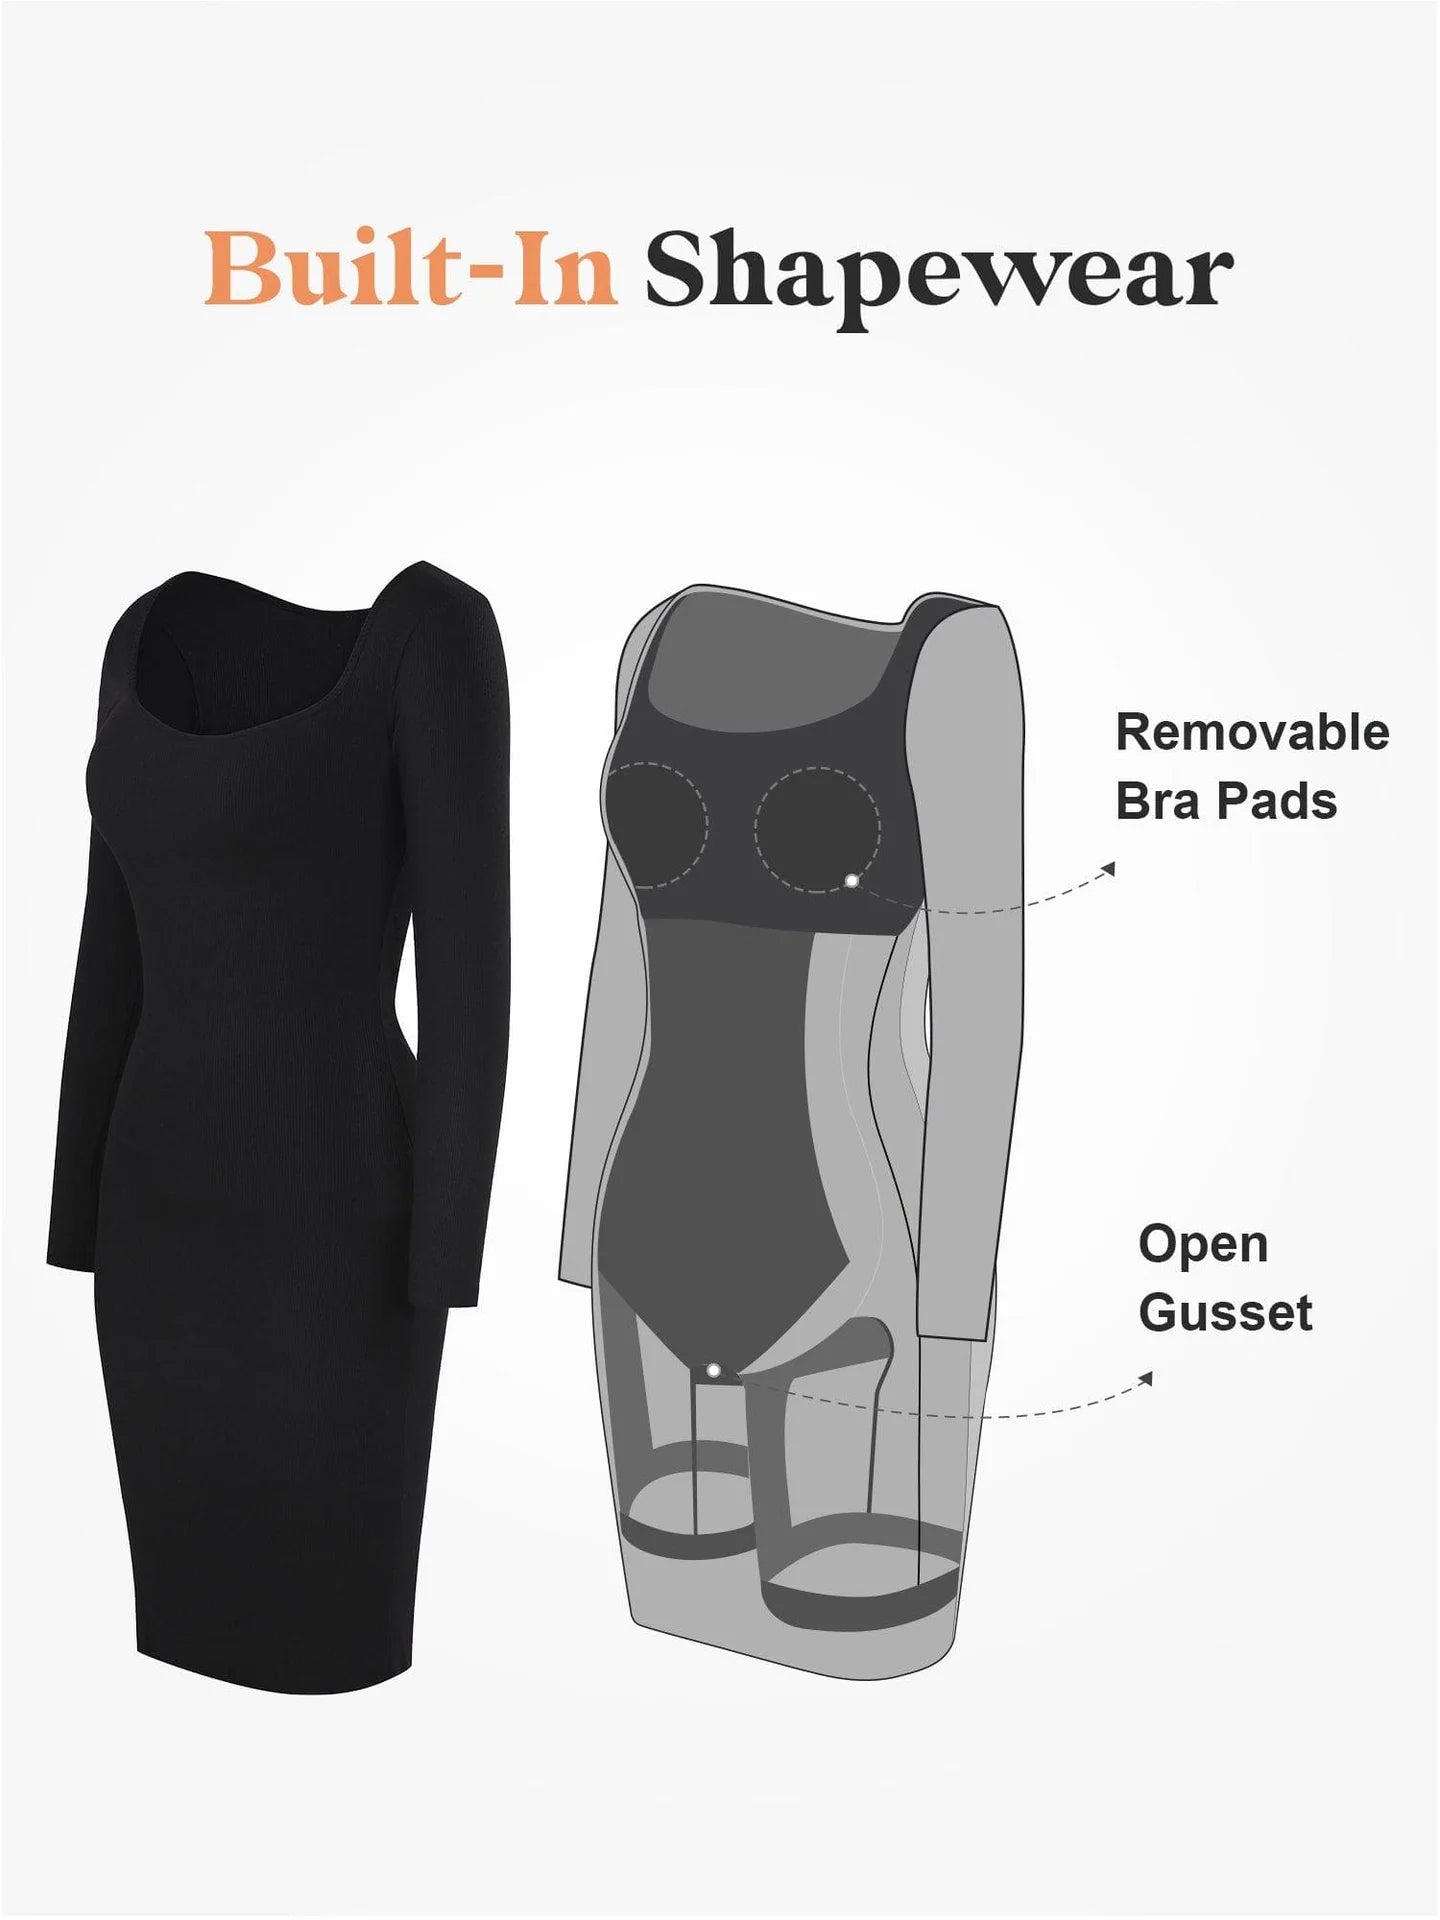 Experience the Best Seller Shaper Dress at Popilush